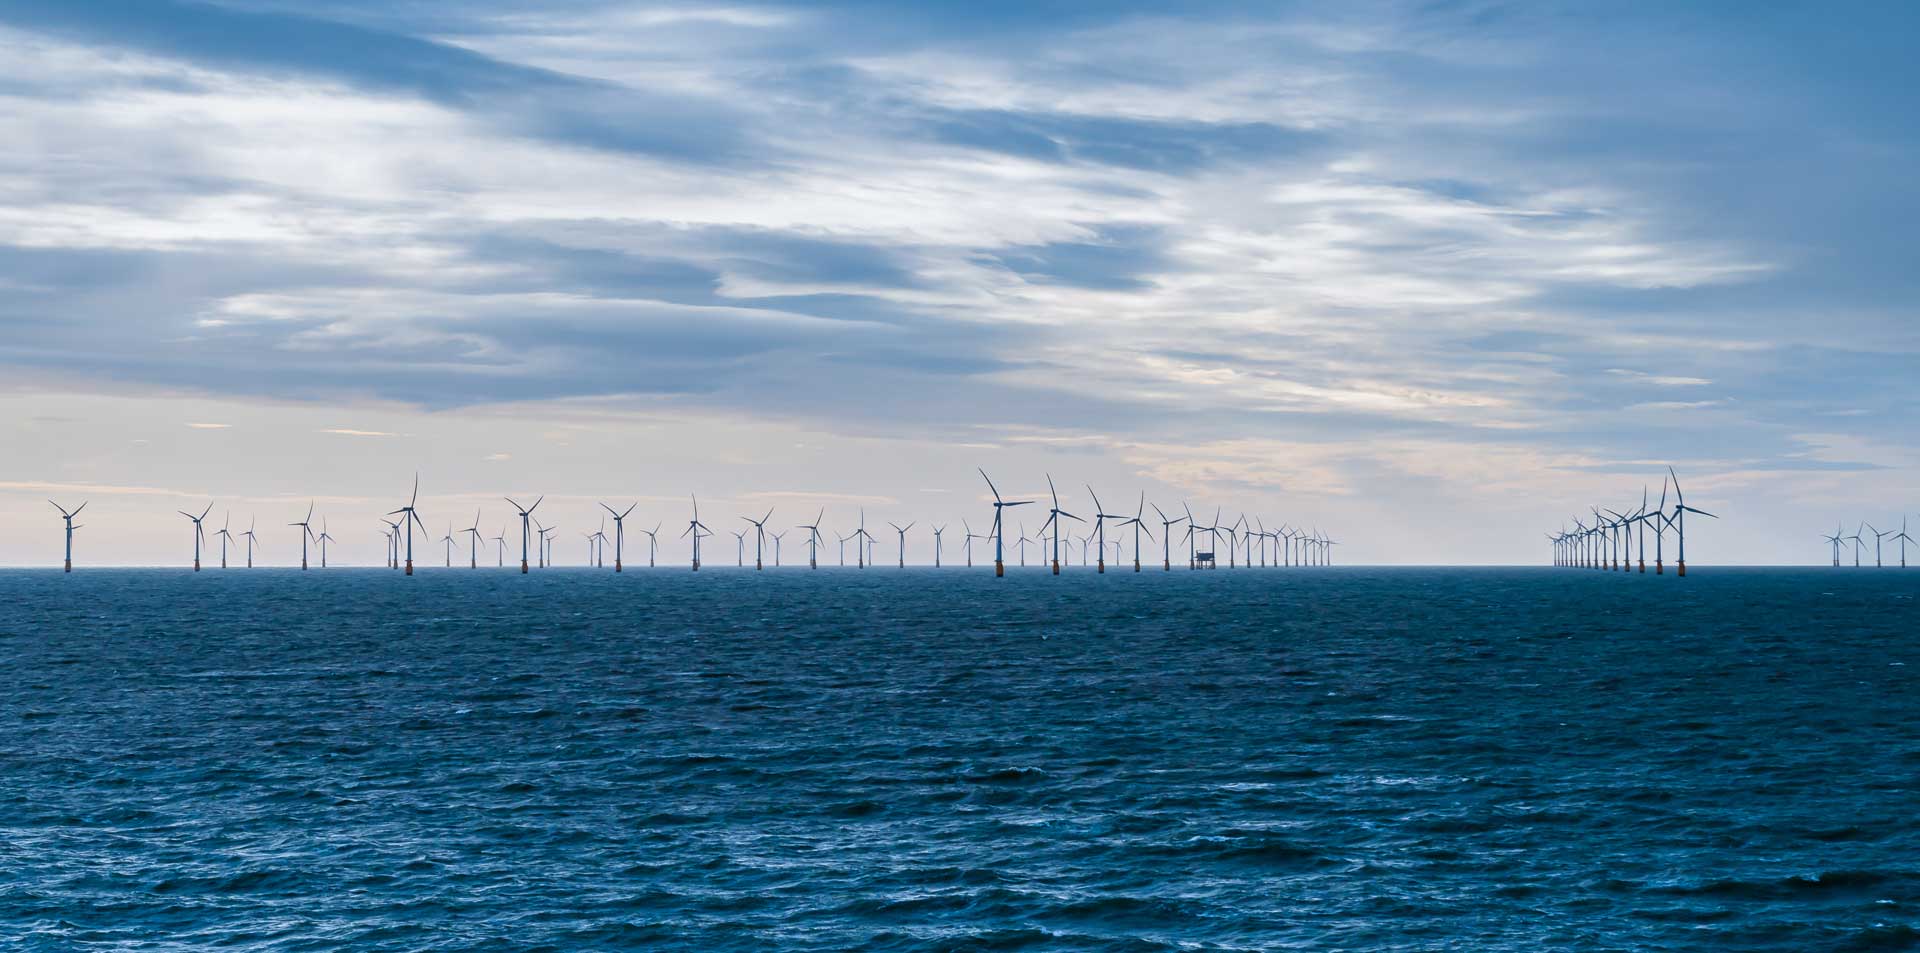 ABL completes engineering on Saint-Brieuc Offshore Wind Farm